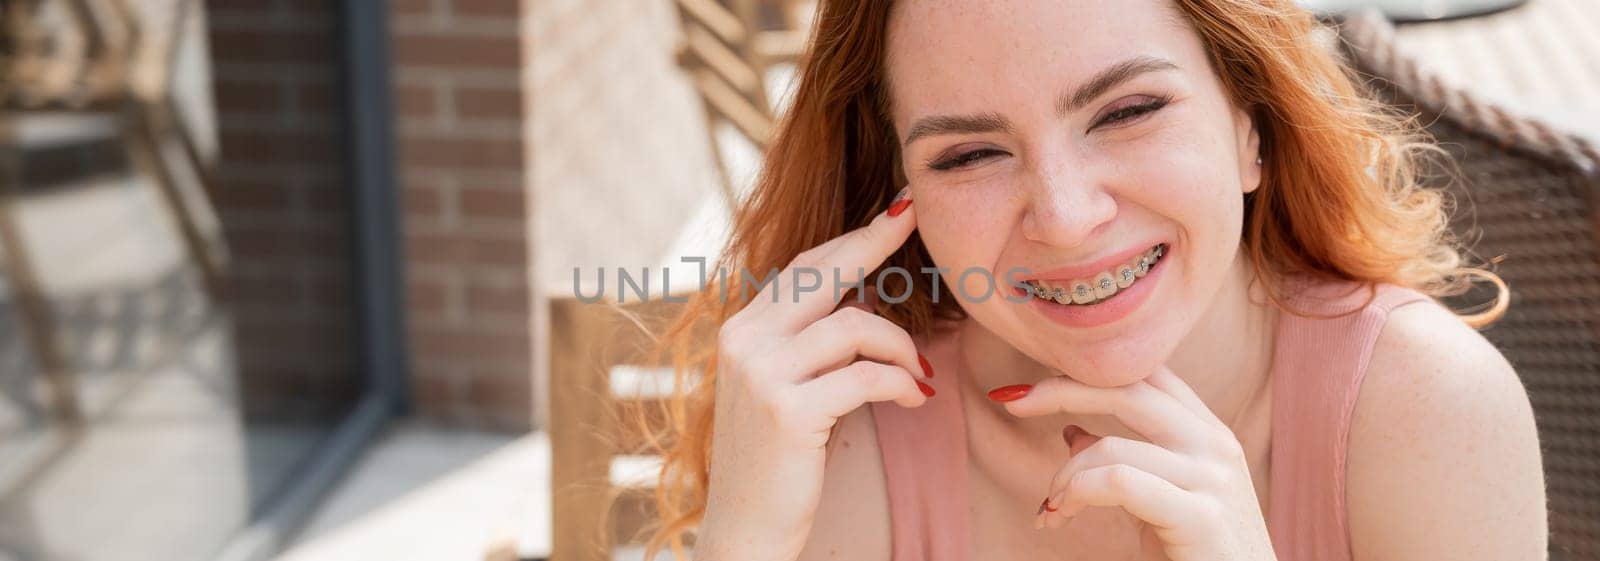 Beautiful young red-haired woman with braces on her teeth smiling while sitting in an outdoor cafe. Widescreen. by mrwed54